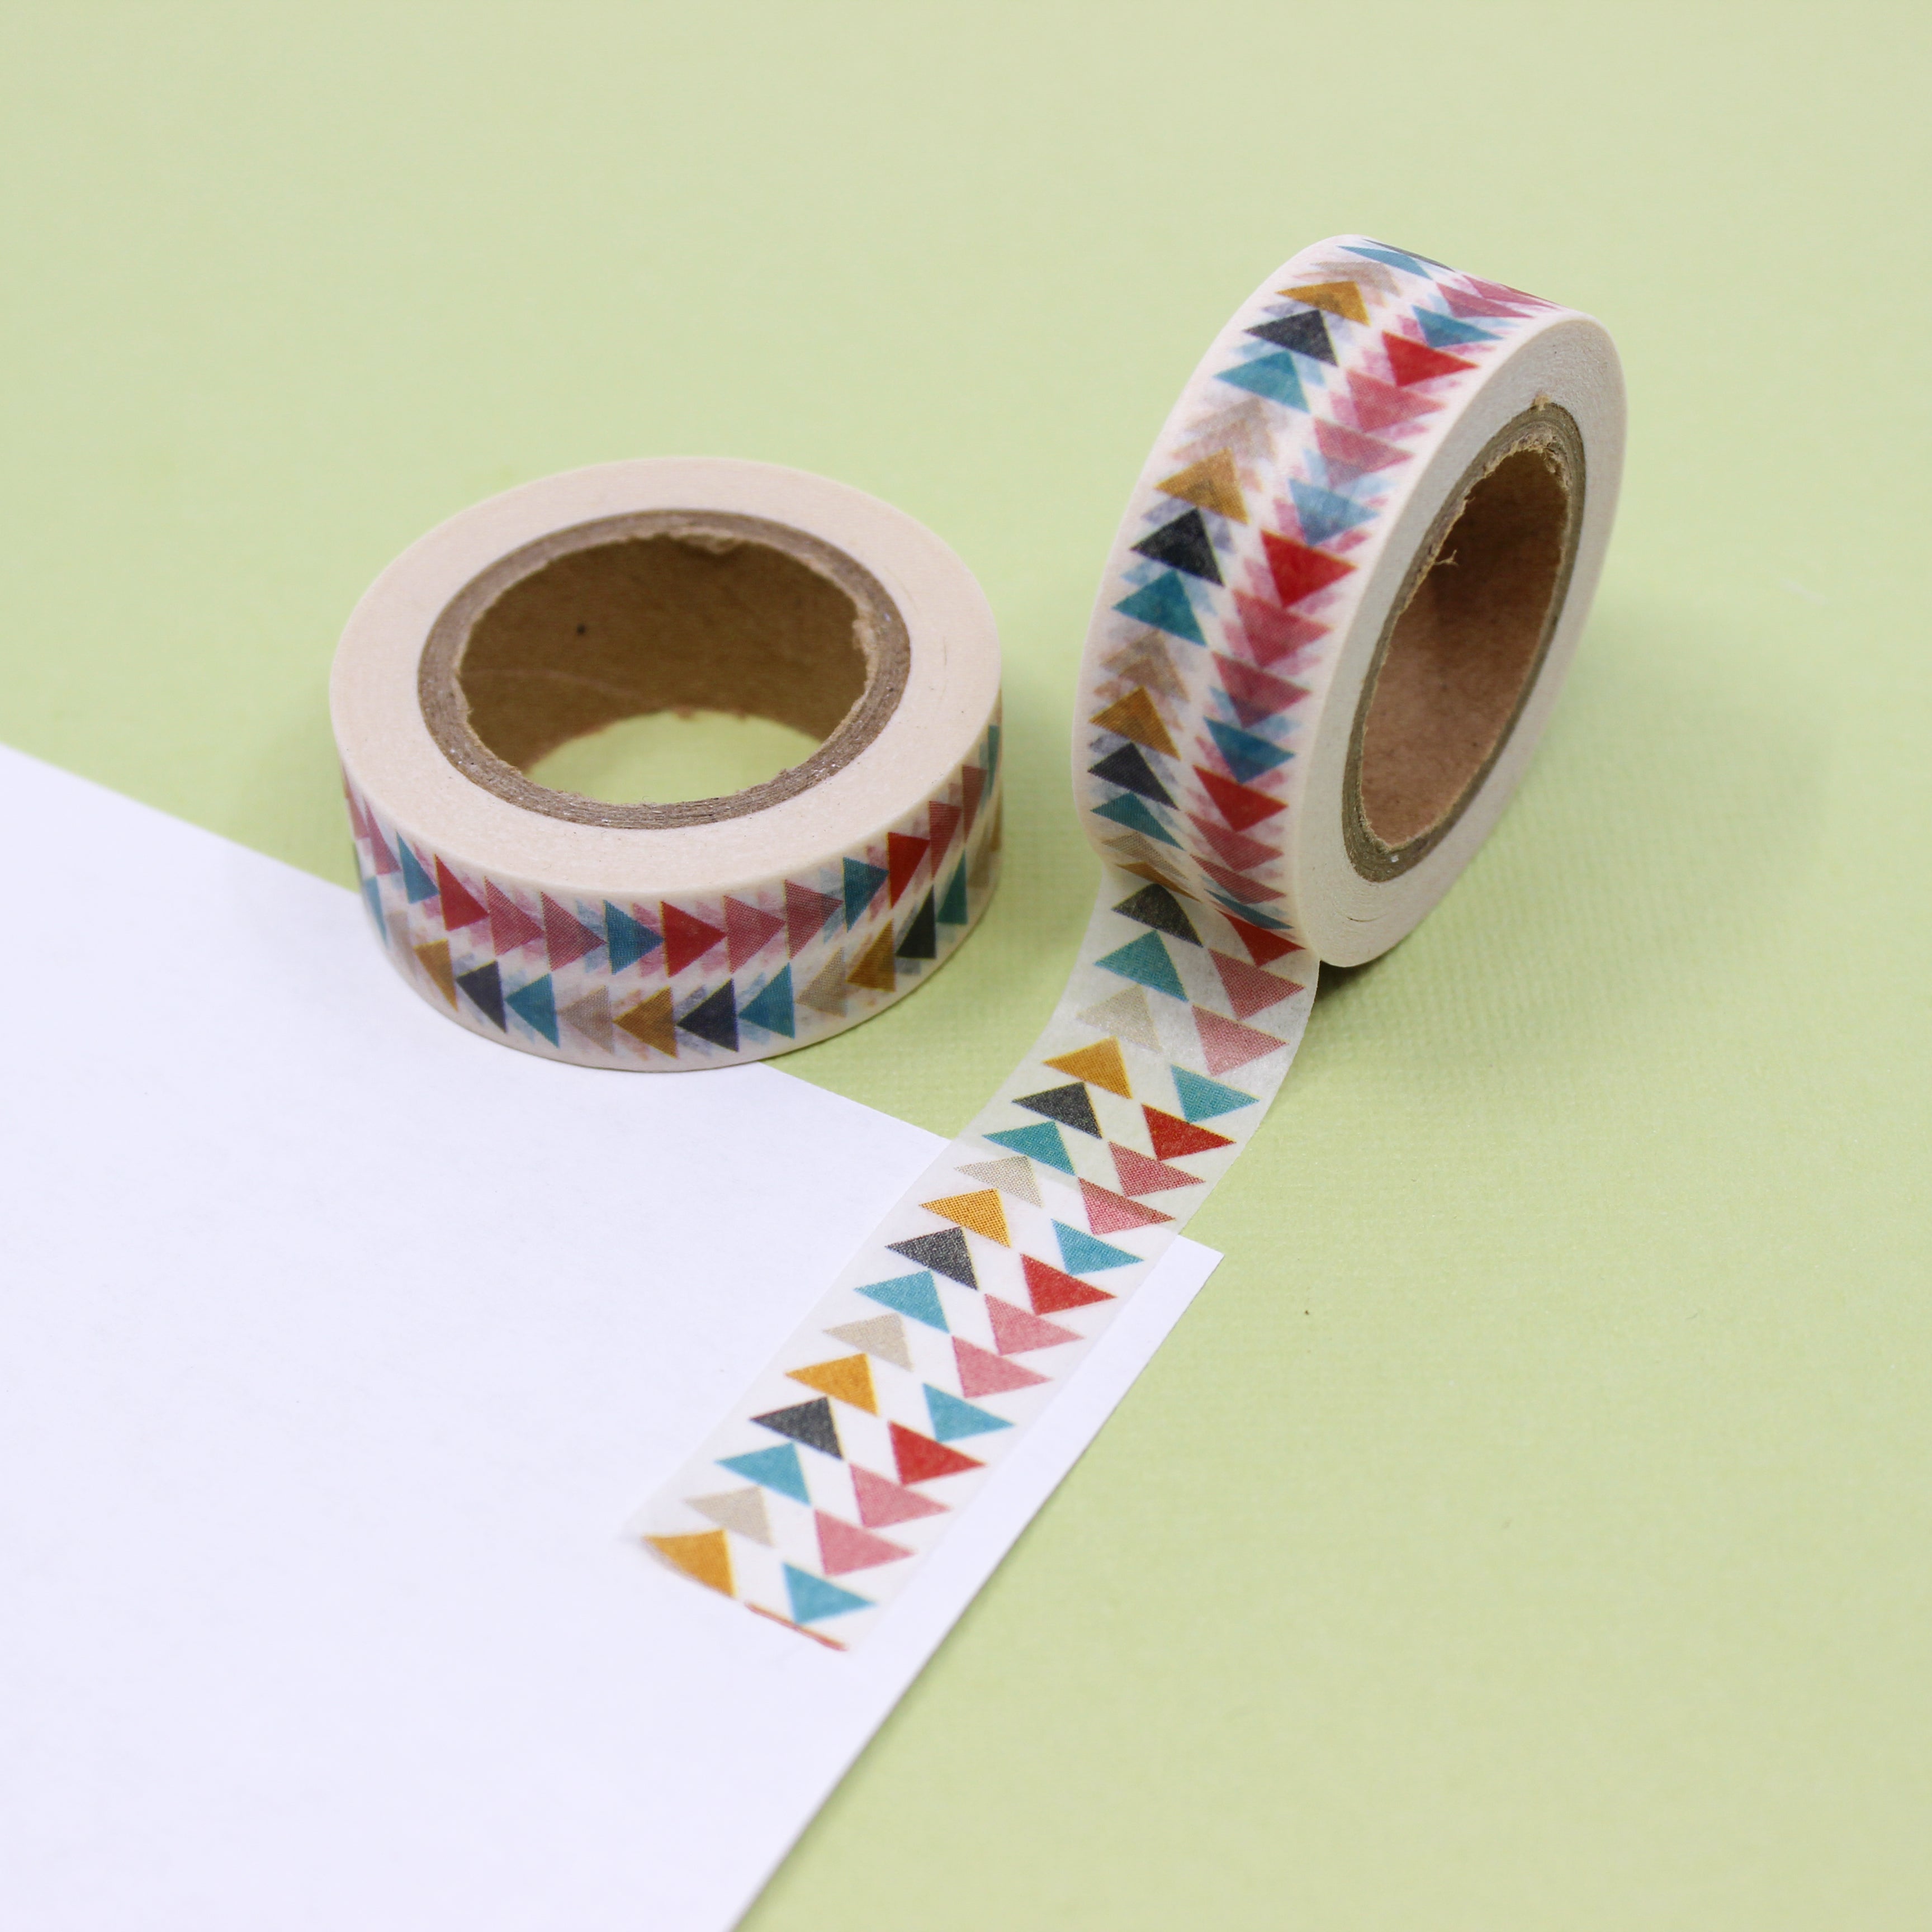 This is a colorful multi-triangle themed washi tape from BBB Supplies Craft Shop